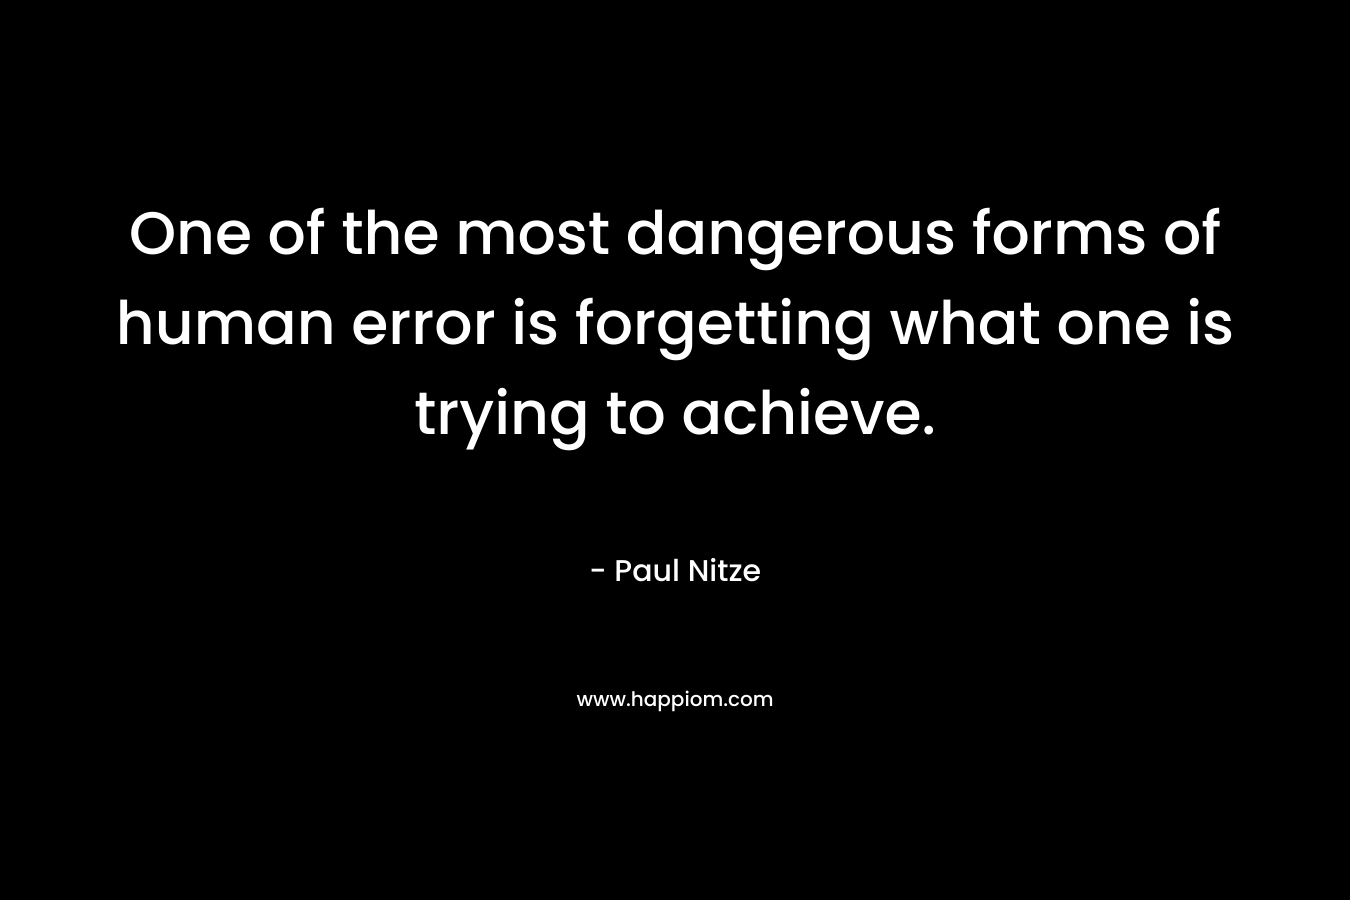 One of the most dangerous forms of human error is forgetting what one is trying to achieve. – Paul Nitze